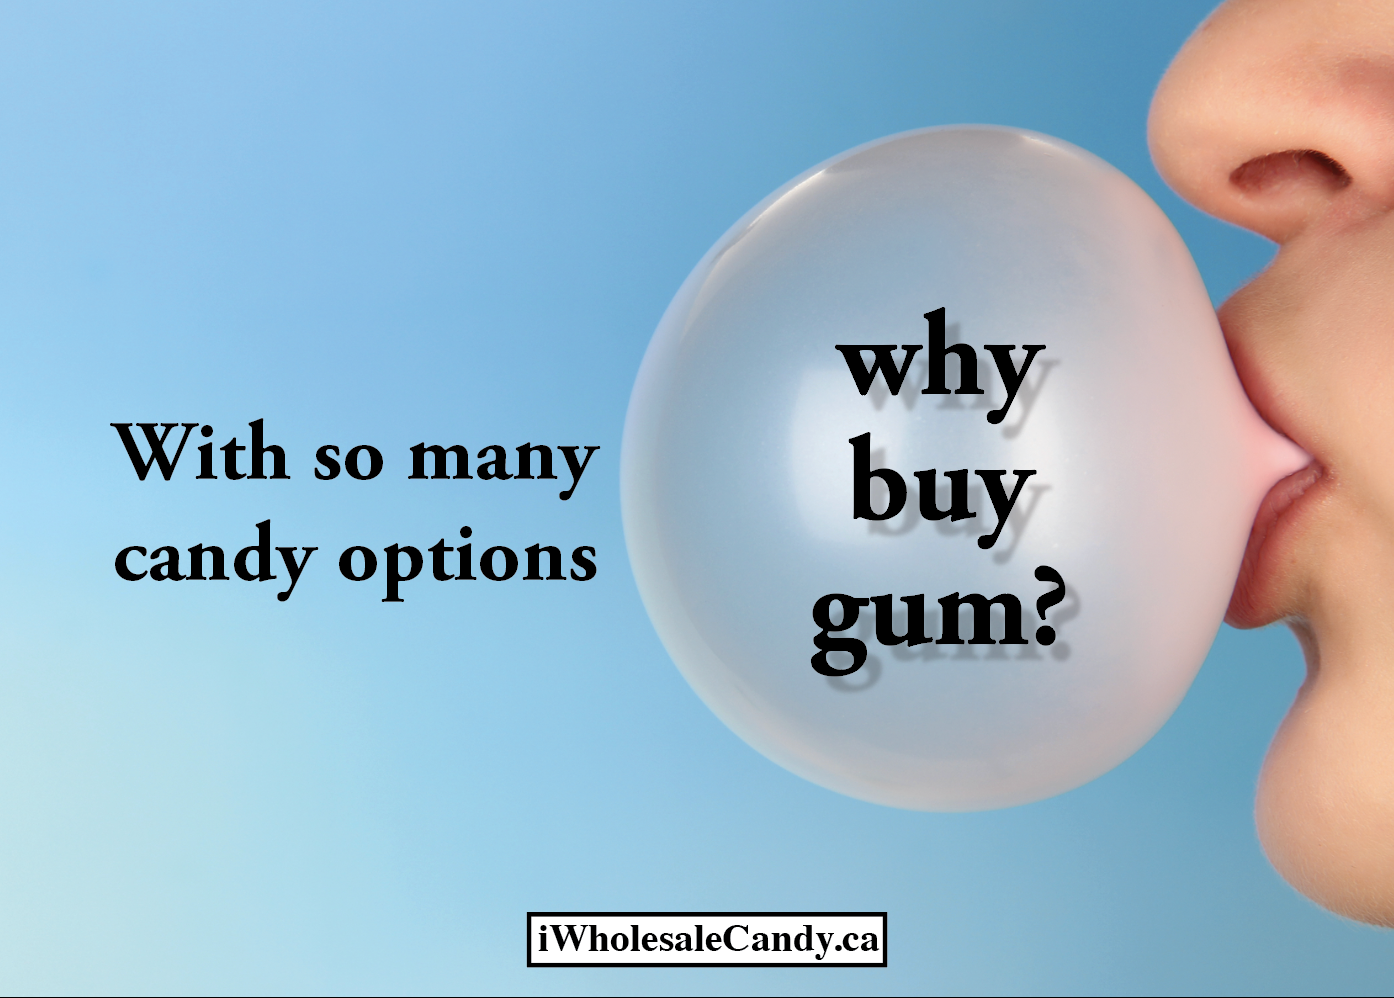 With so much candy: Why buy gum?